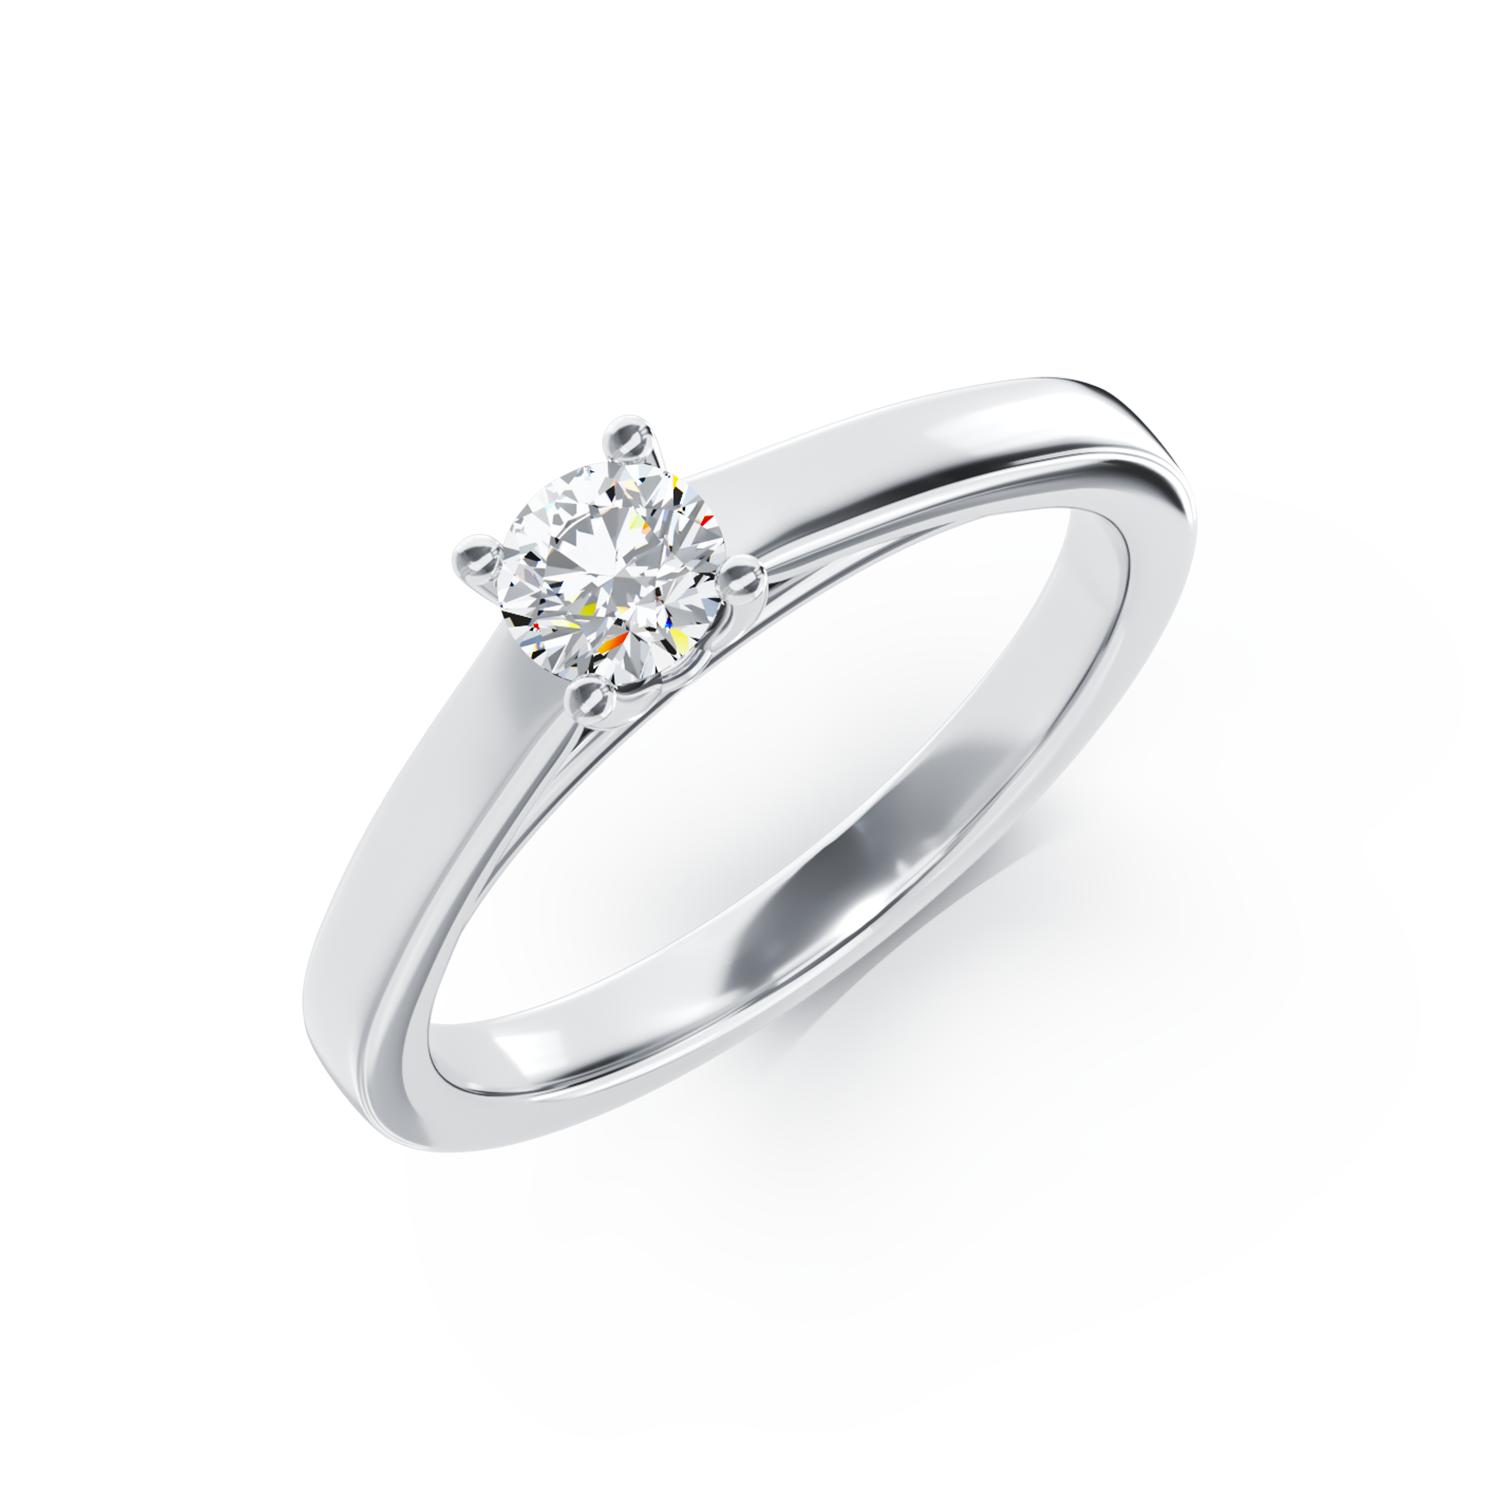 18K white gold engagement ring with a 0.34ct solitaire diamond